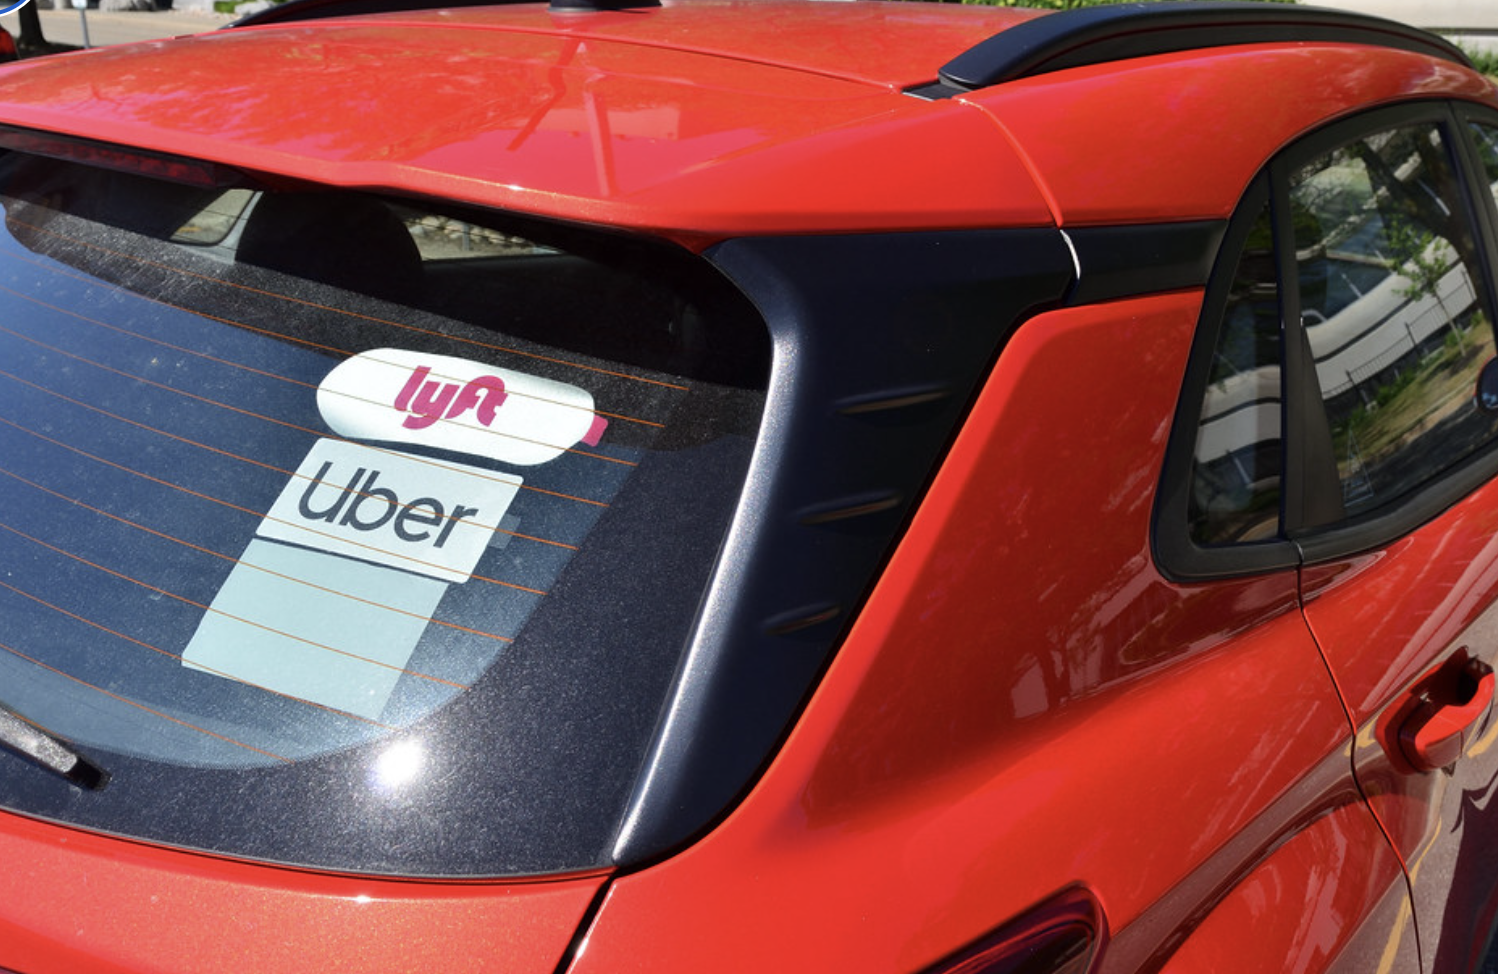 Vehicle with UBER sticker in rear window